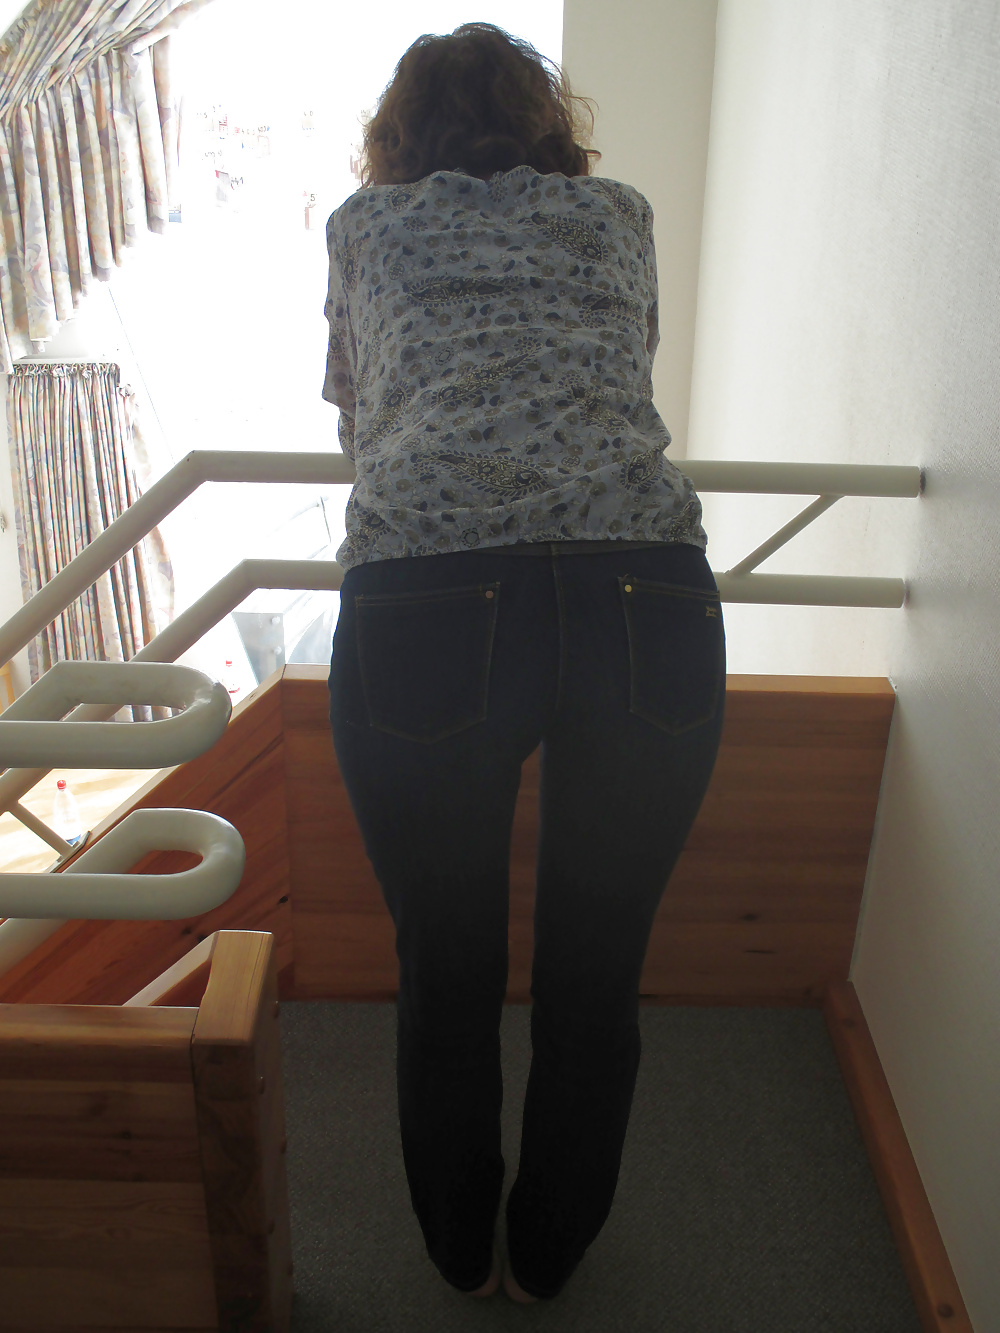 Big firm mature ass in jeans #22593234